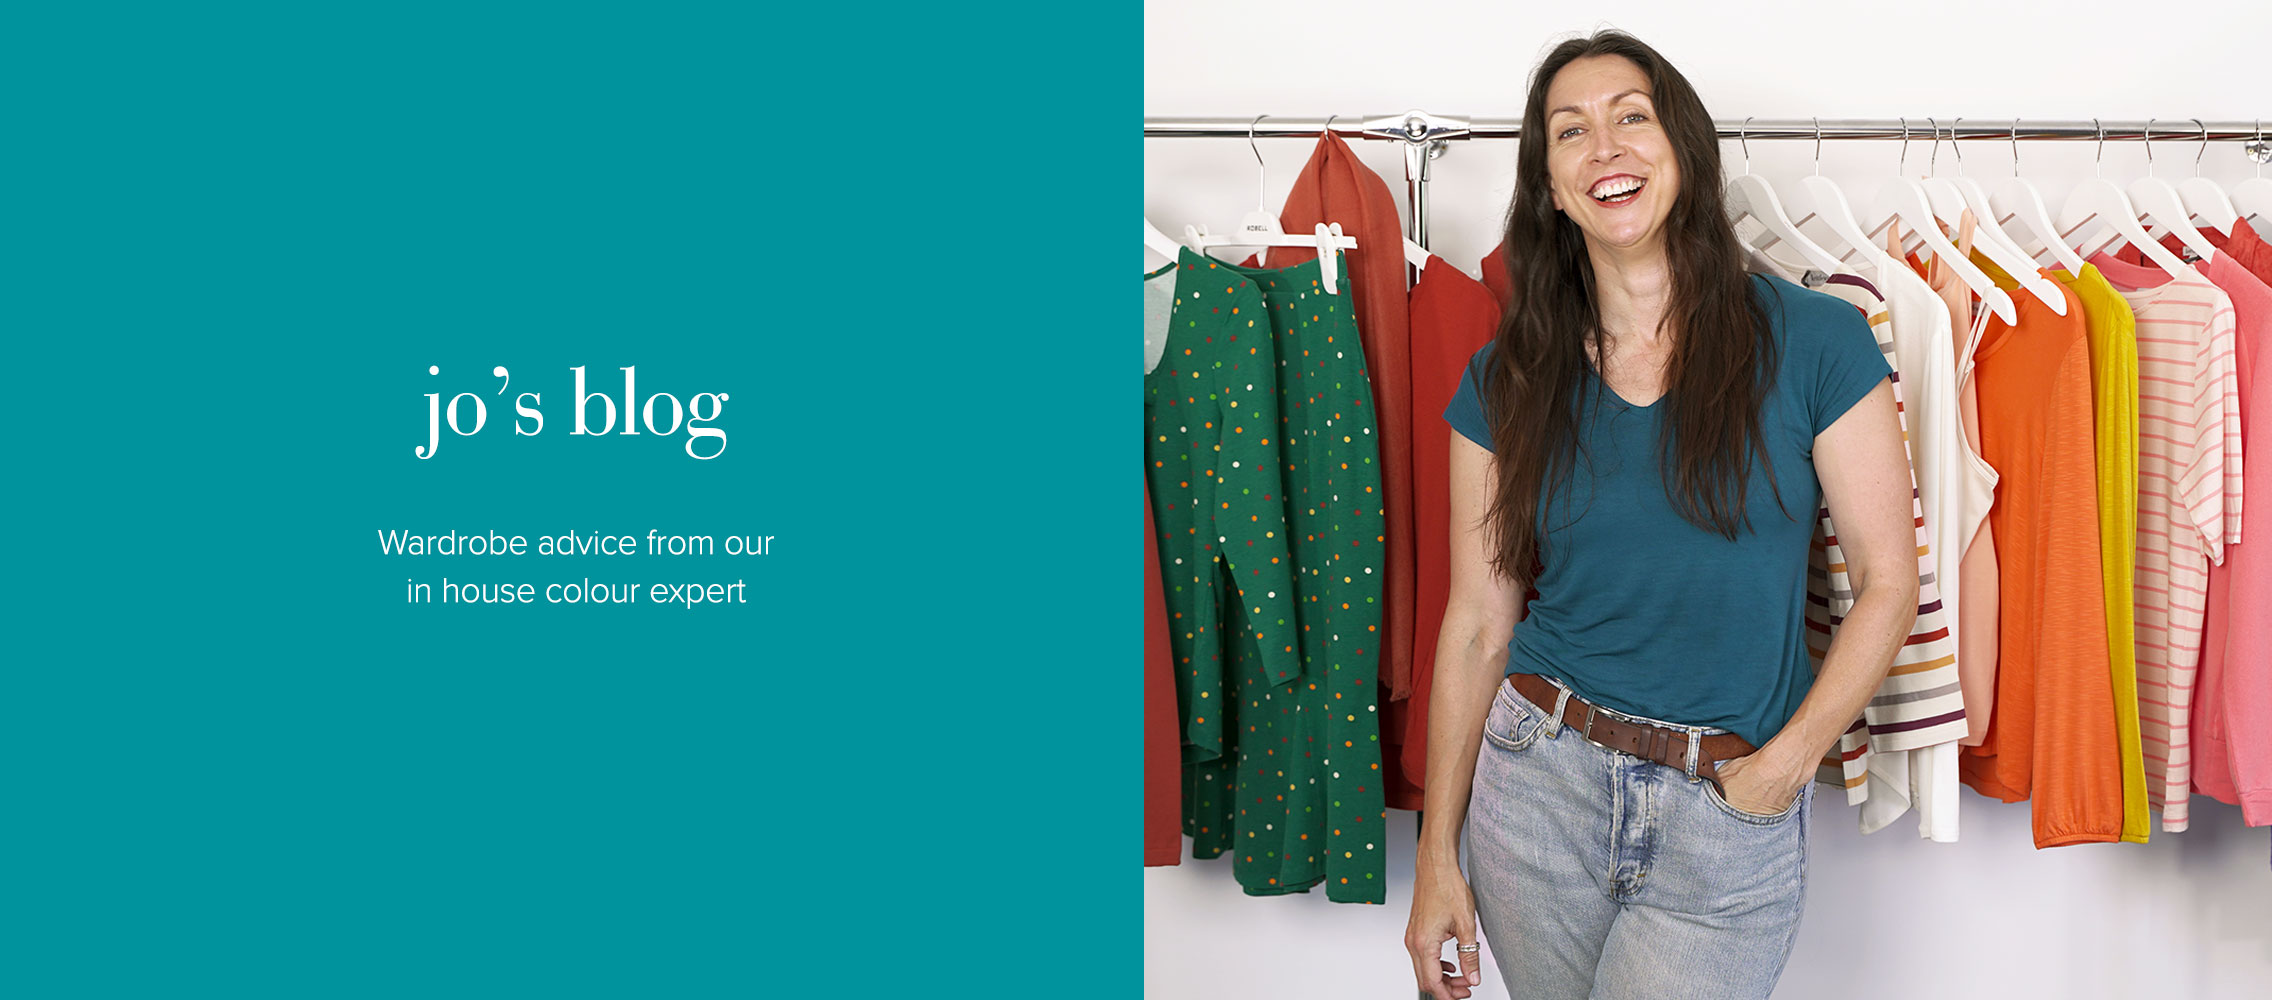 Jo's blog - wardrobe advice from our in house colour expert